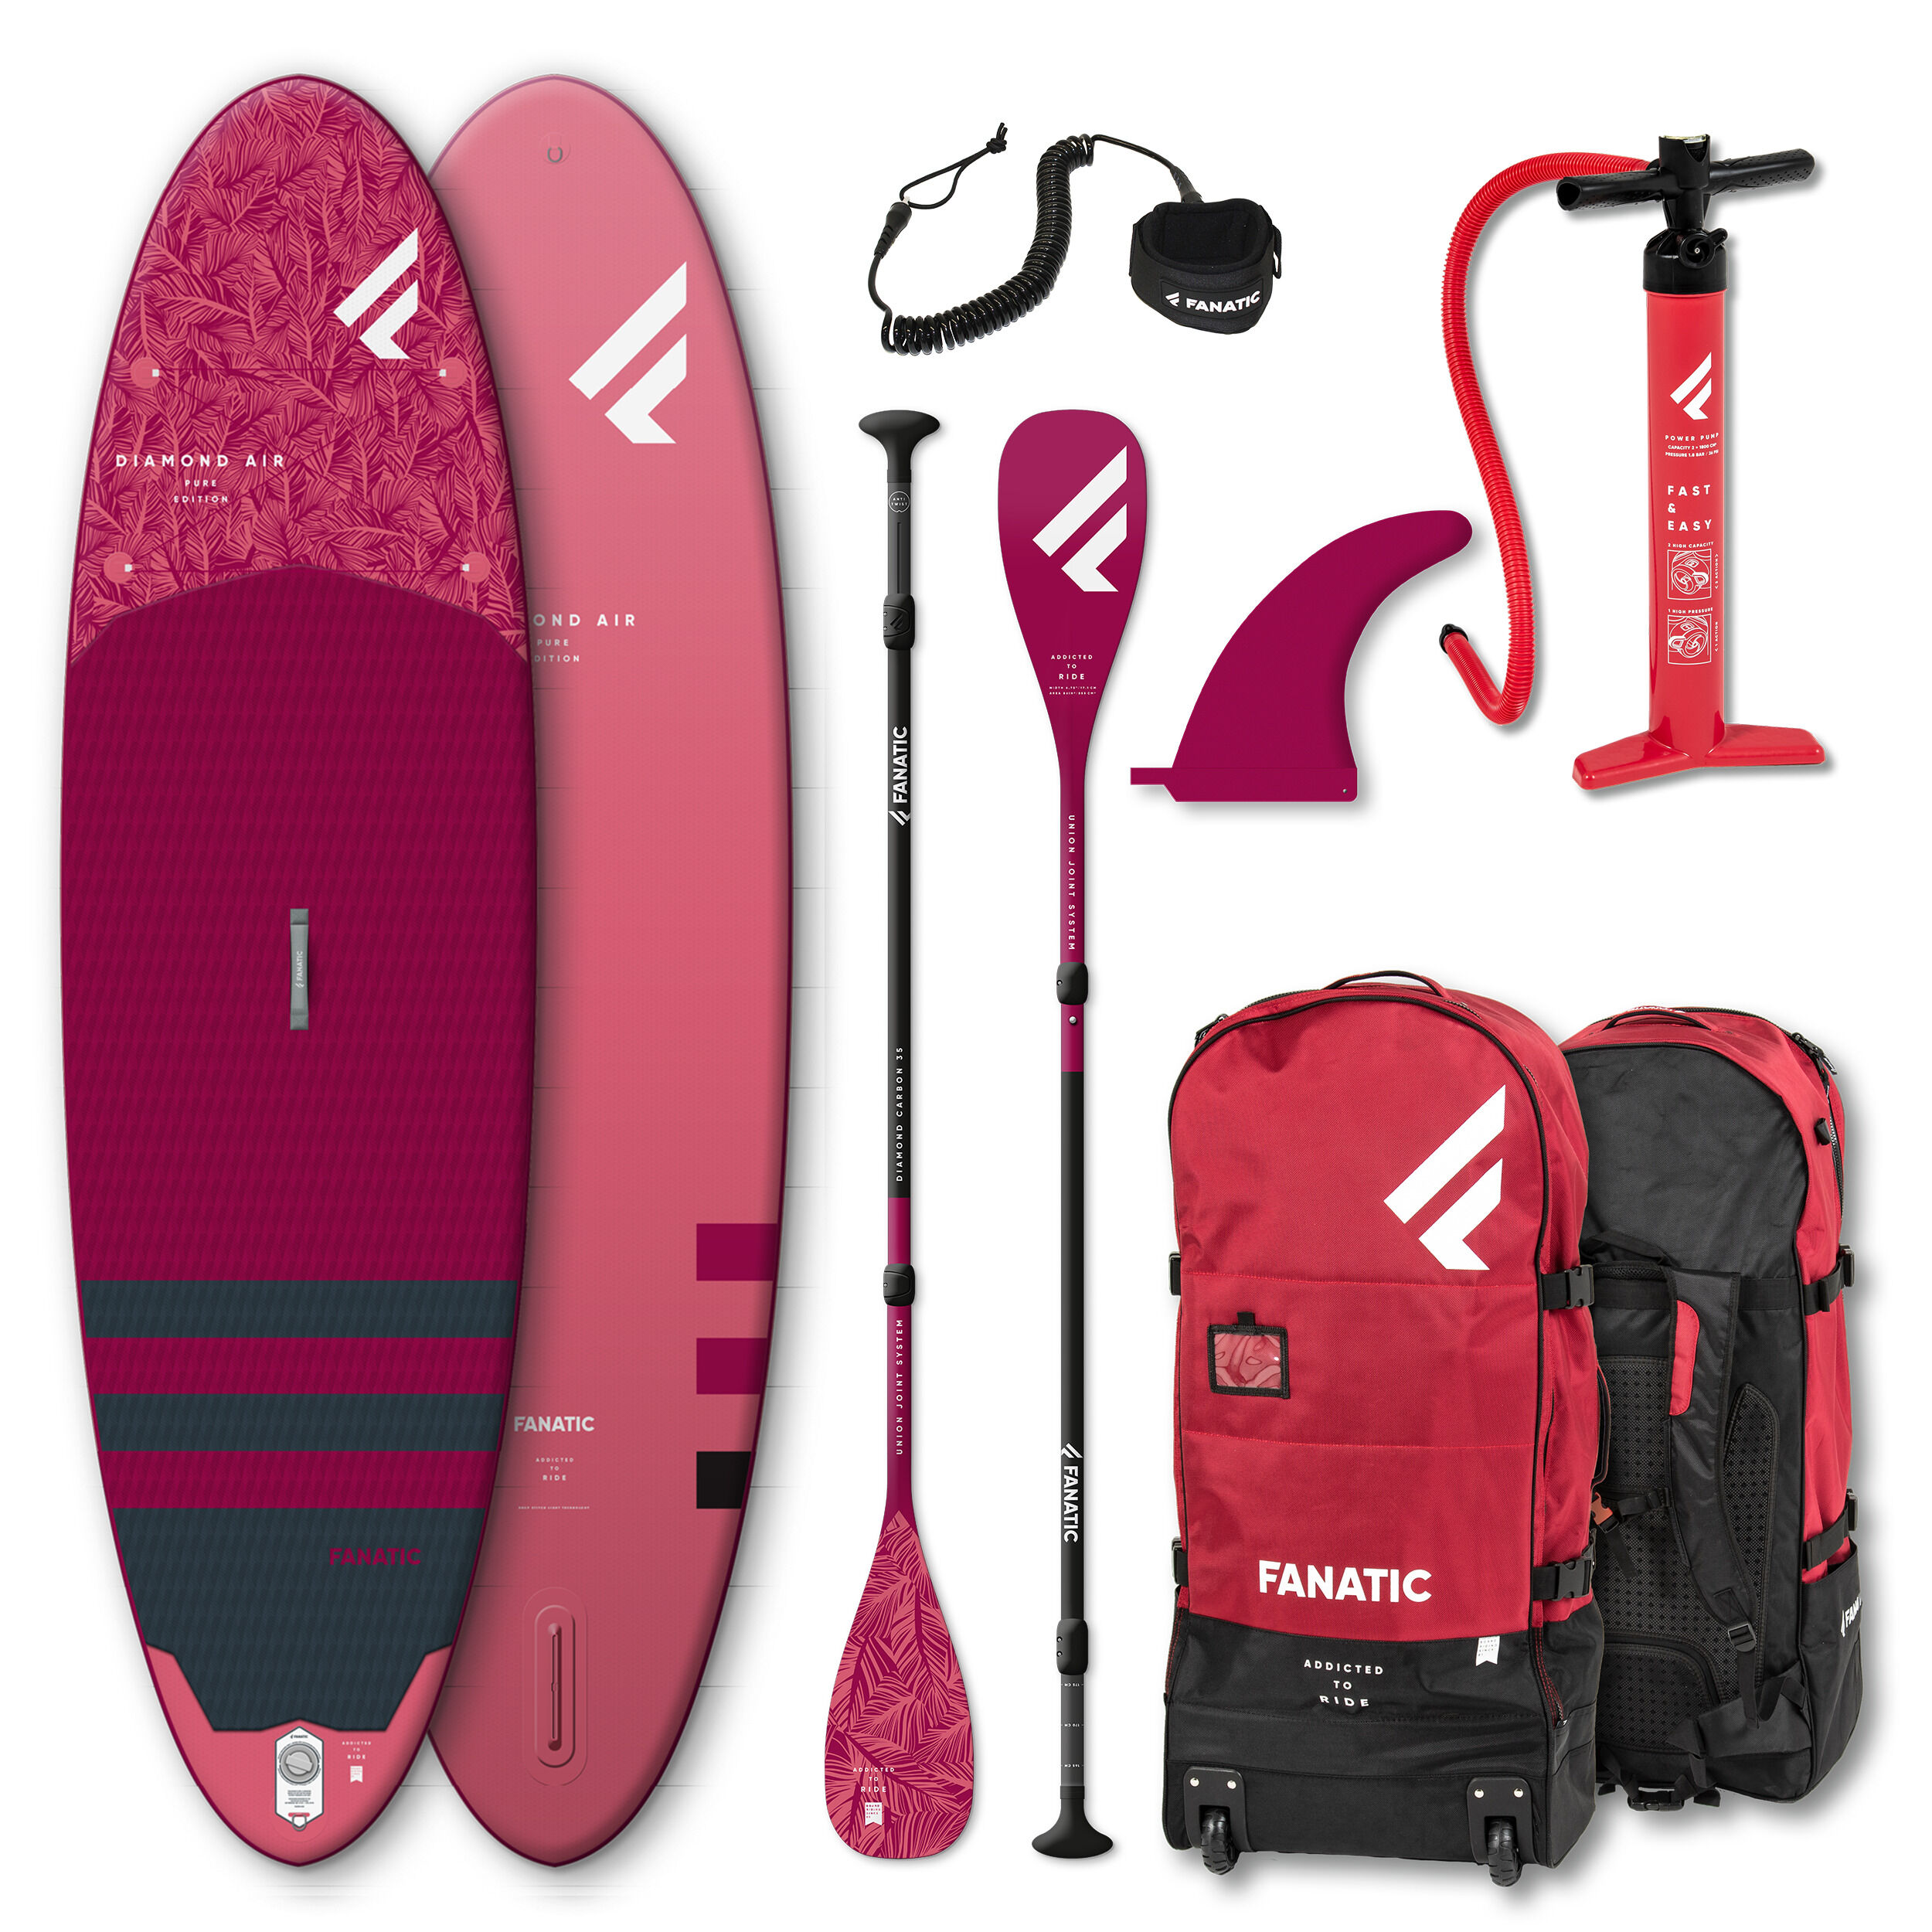 Fanatic Package Diamond Air - Inflatable paddle board